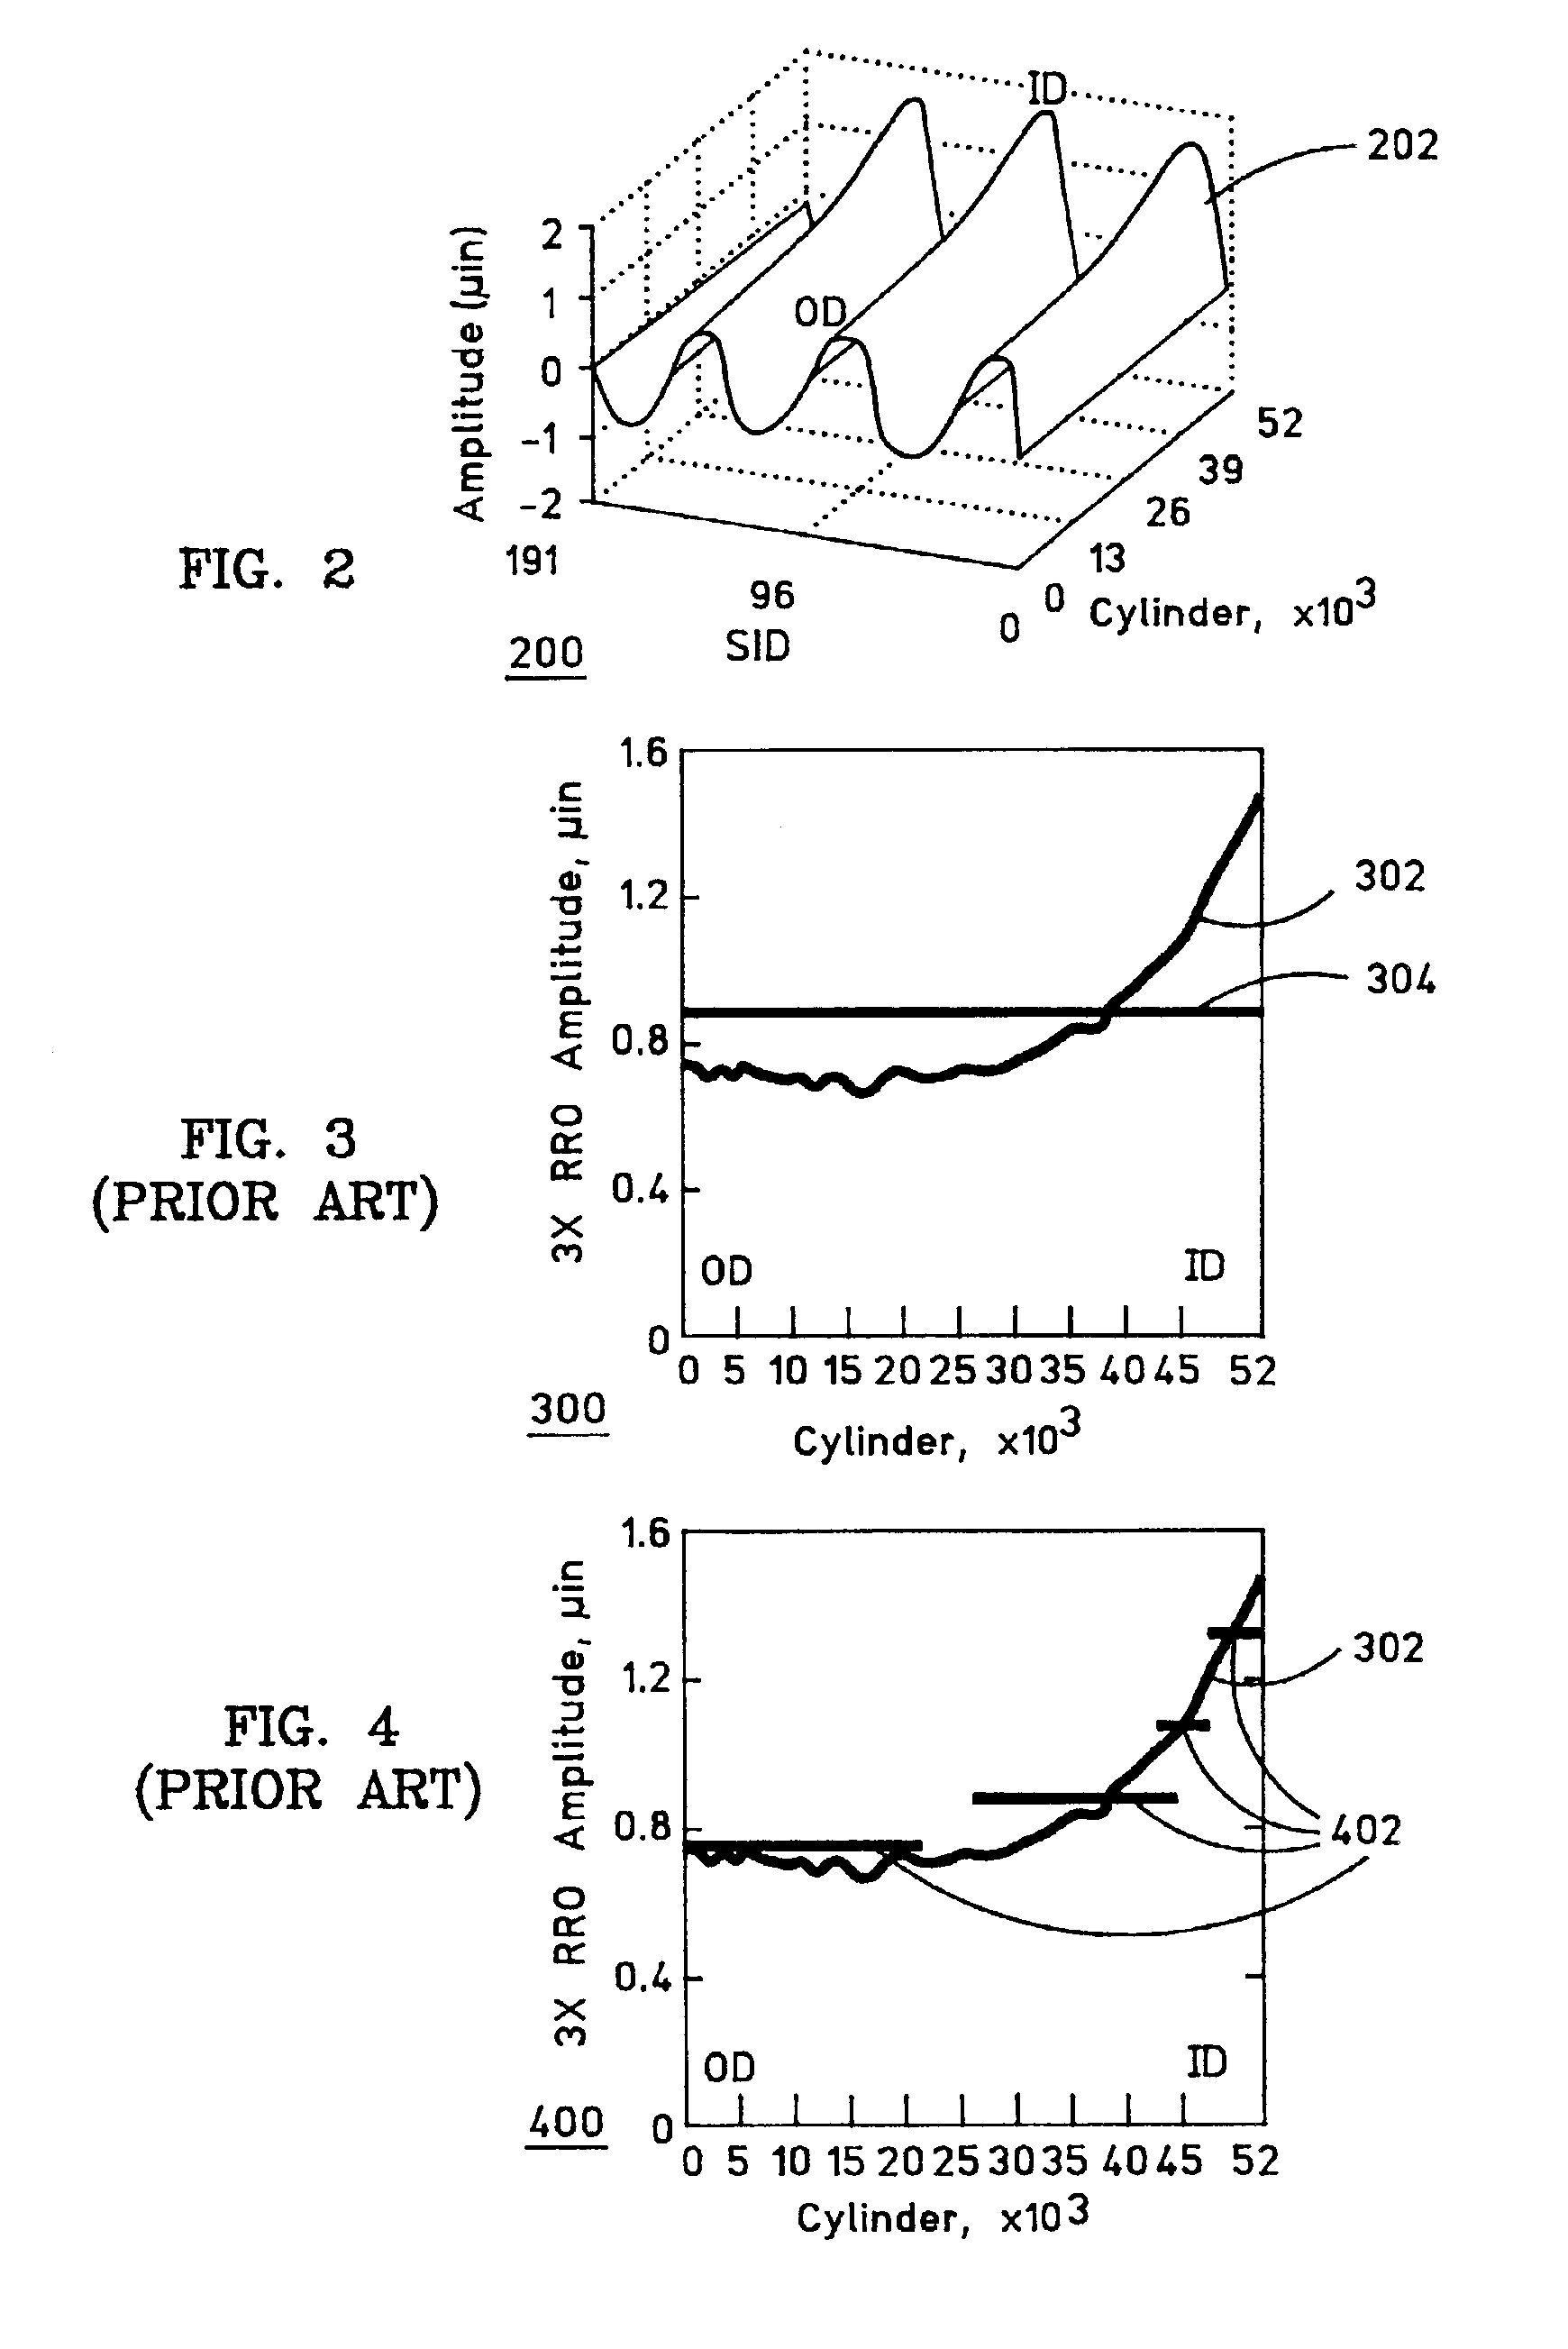 Repeatable runout (RRO) compensation methods and apparatus for data storage devices